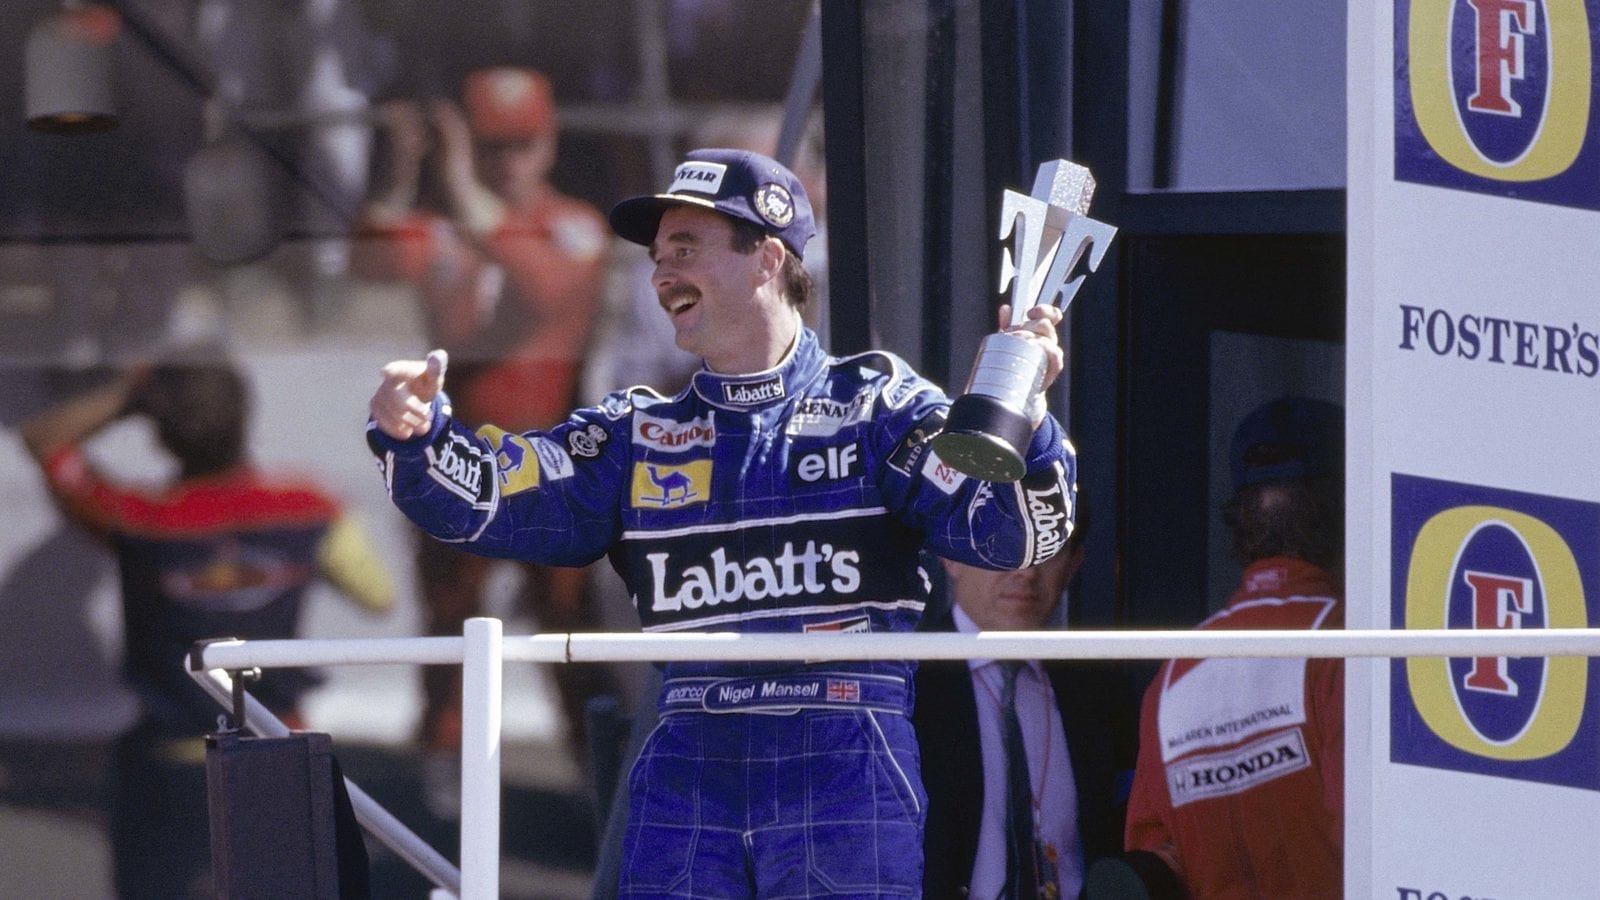 Nigel-Mansell-celebrates-victory-on-the-podium-at-Silverstone-after-the-1991-British-Grand-Prix